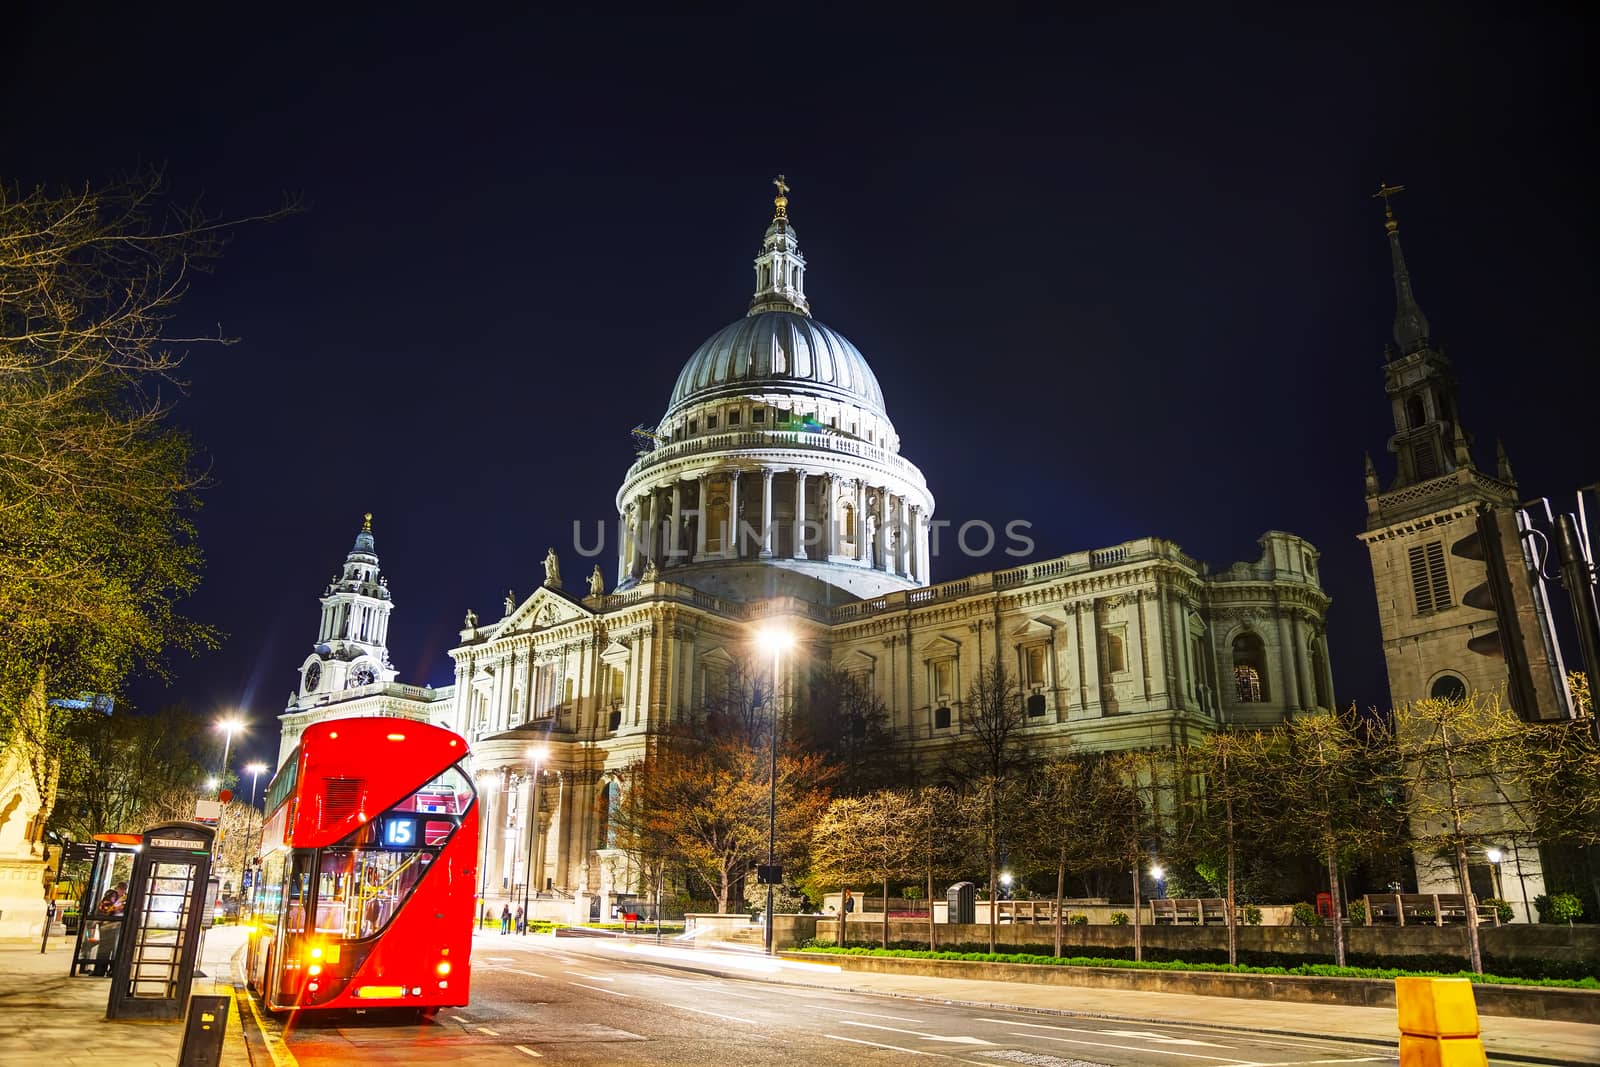 Saint Pauls cathedral in London, United Kingdom in the evening